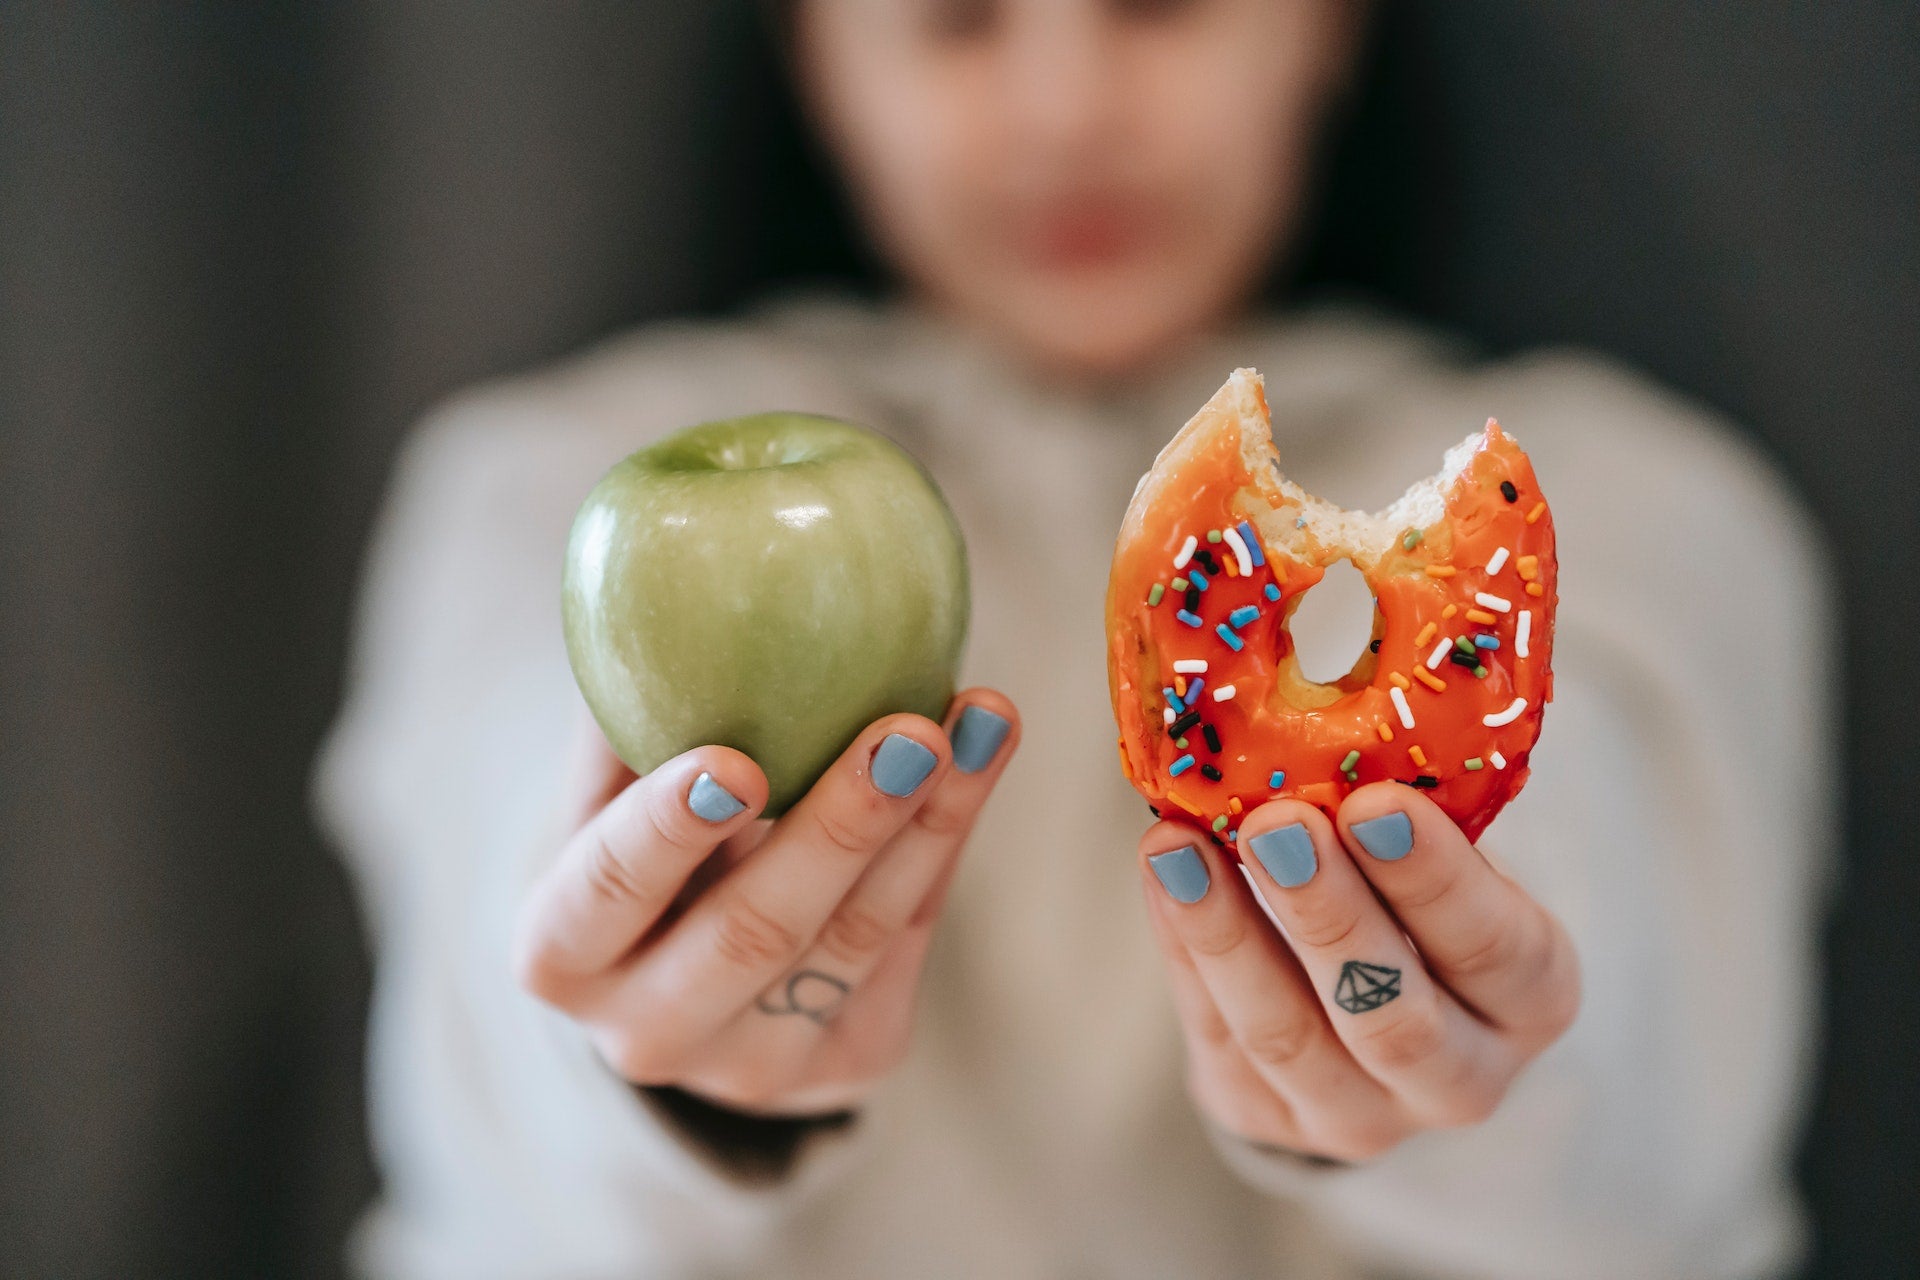 A woman holds up an apple in one hand and a donut in the other.